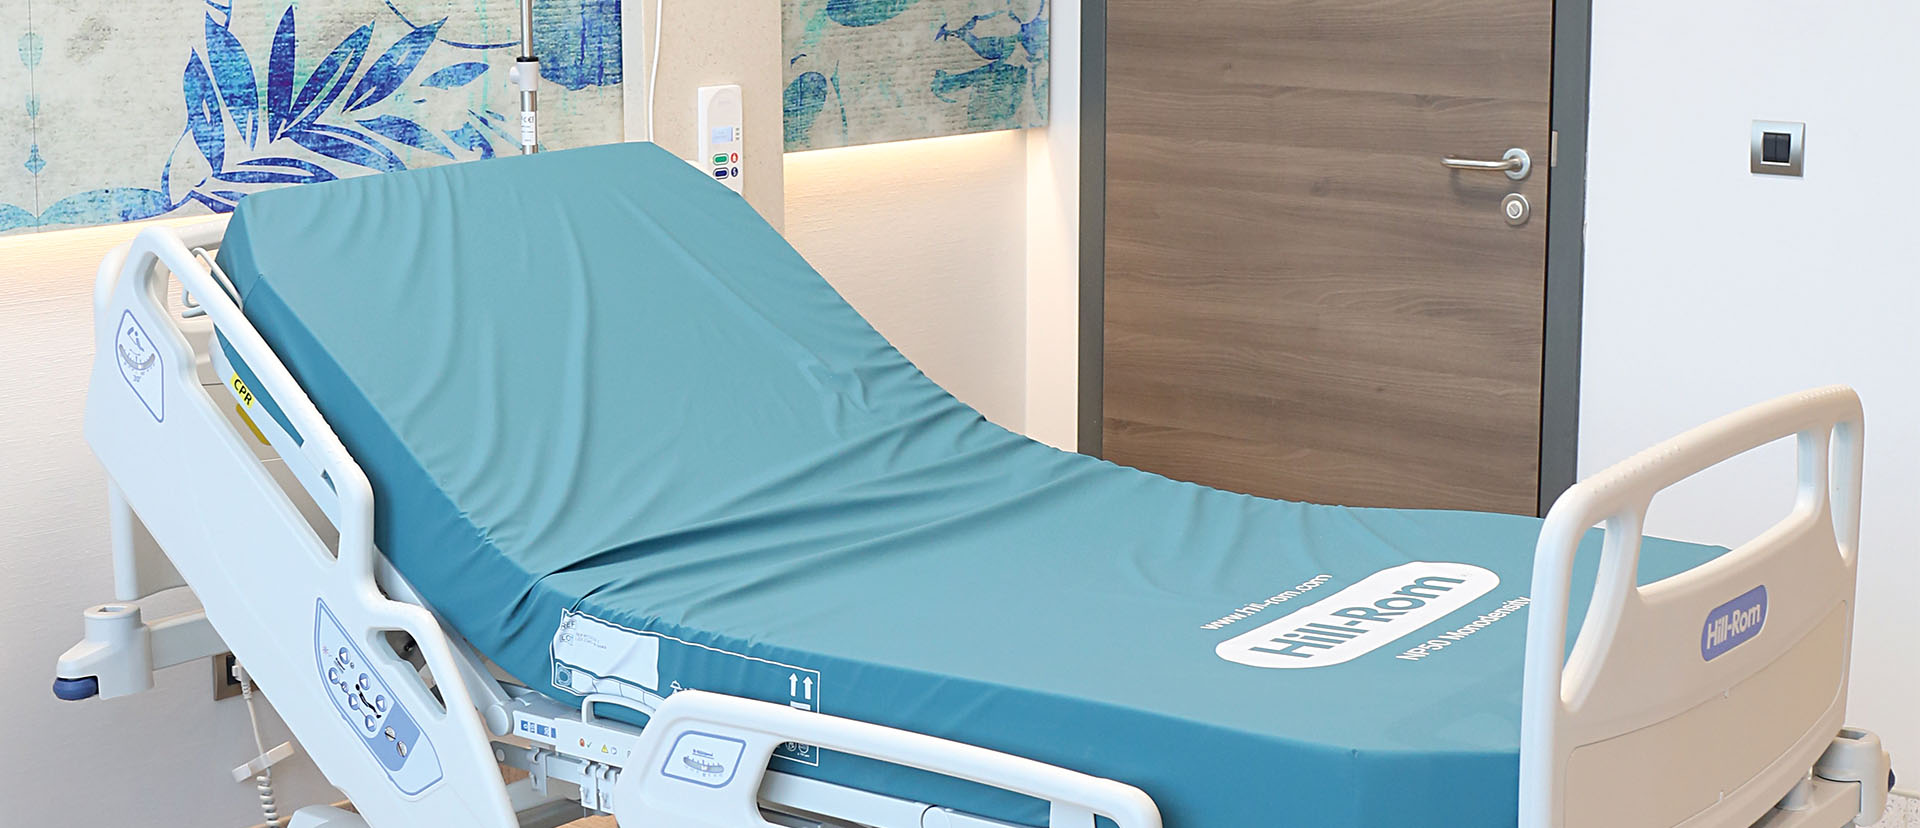 Medipol Istanbul: Smart Hospital with Visocall IP